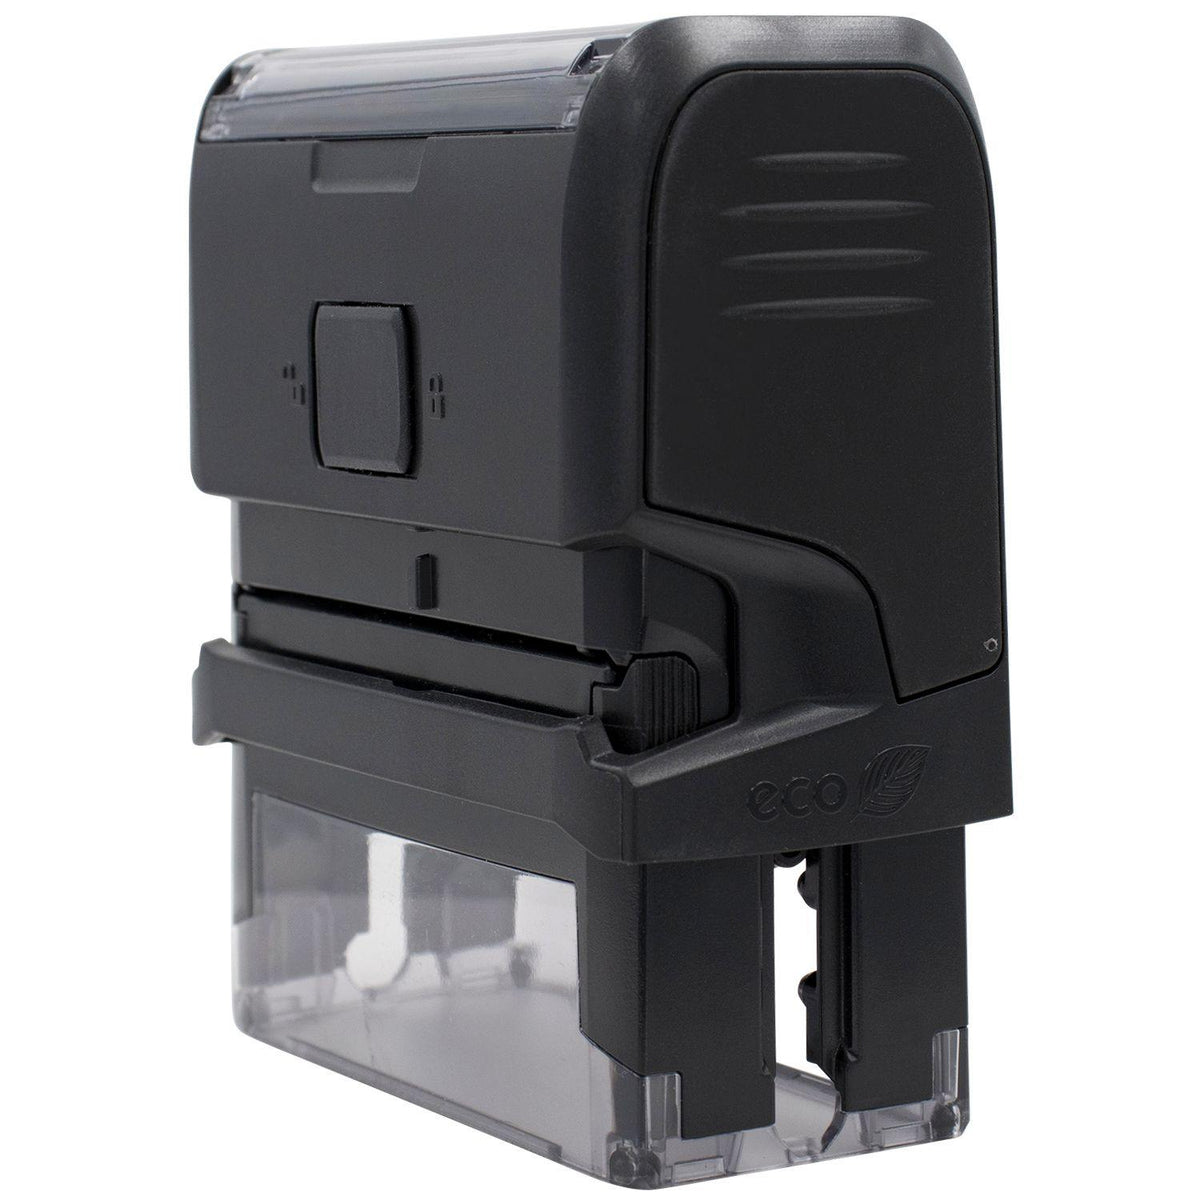 Large Self-Inking Outline Paid Stamp - Engineer Seal Stamps - Brand_Trodat, Impression Size_Large, Stamp Type_Self-Inking Stamp, Type of Use_Finance, Type of Use_General